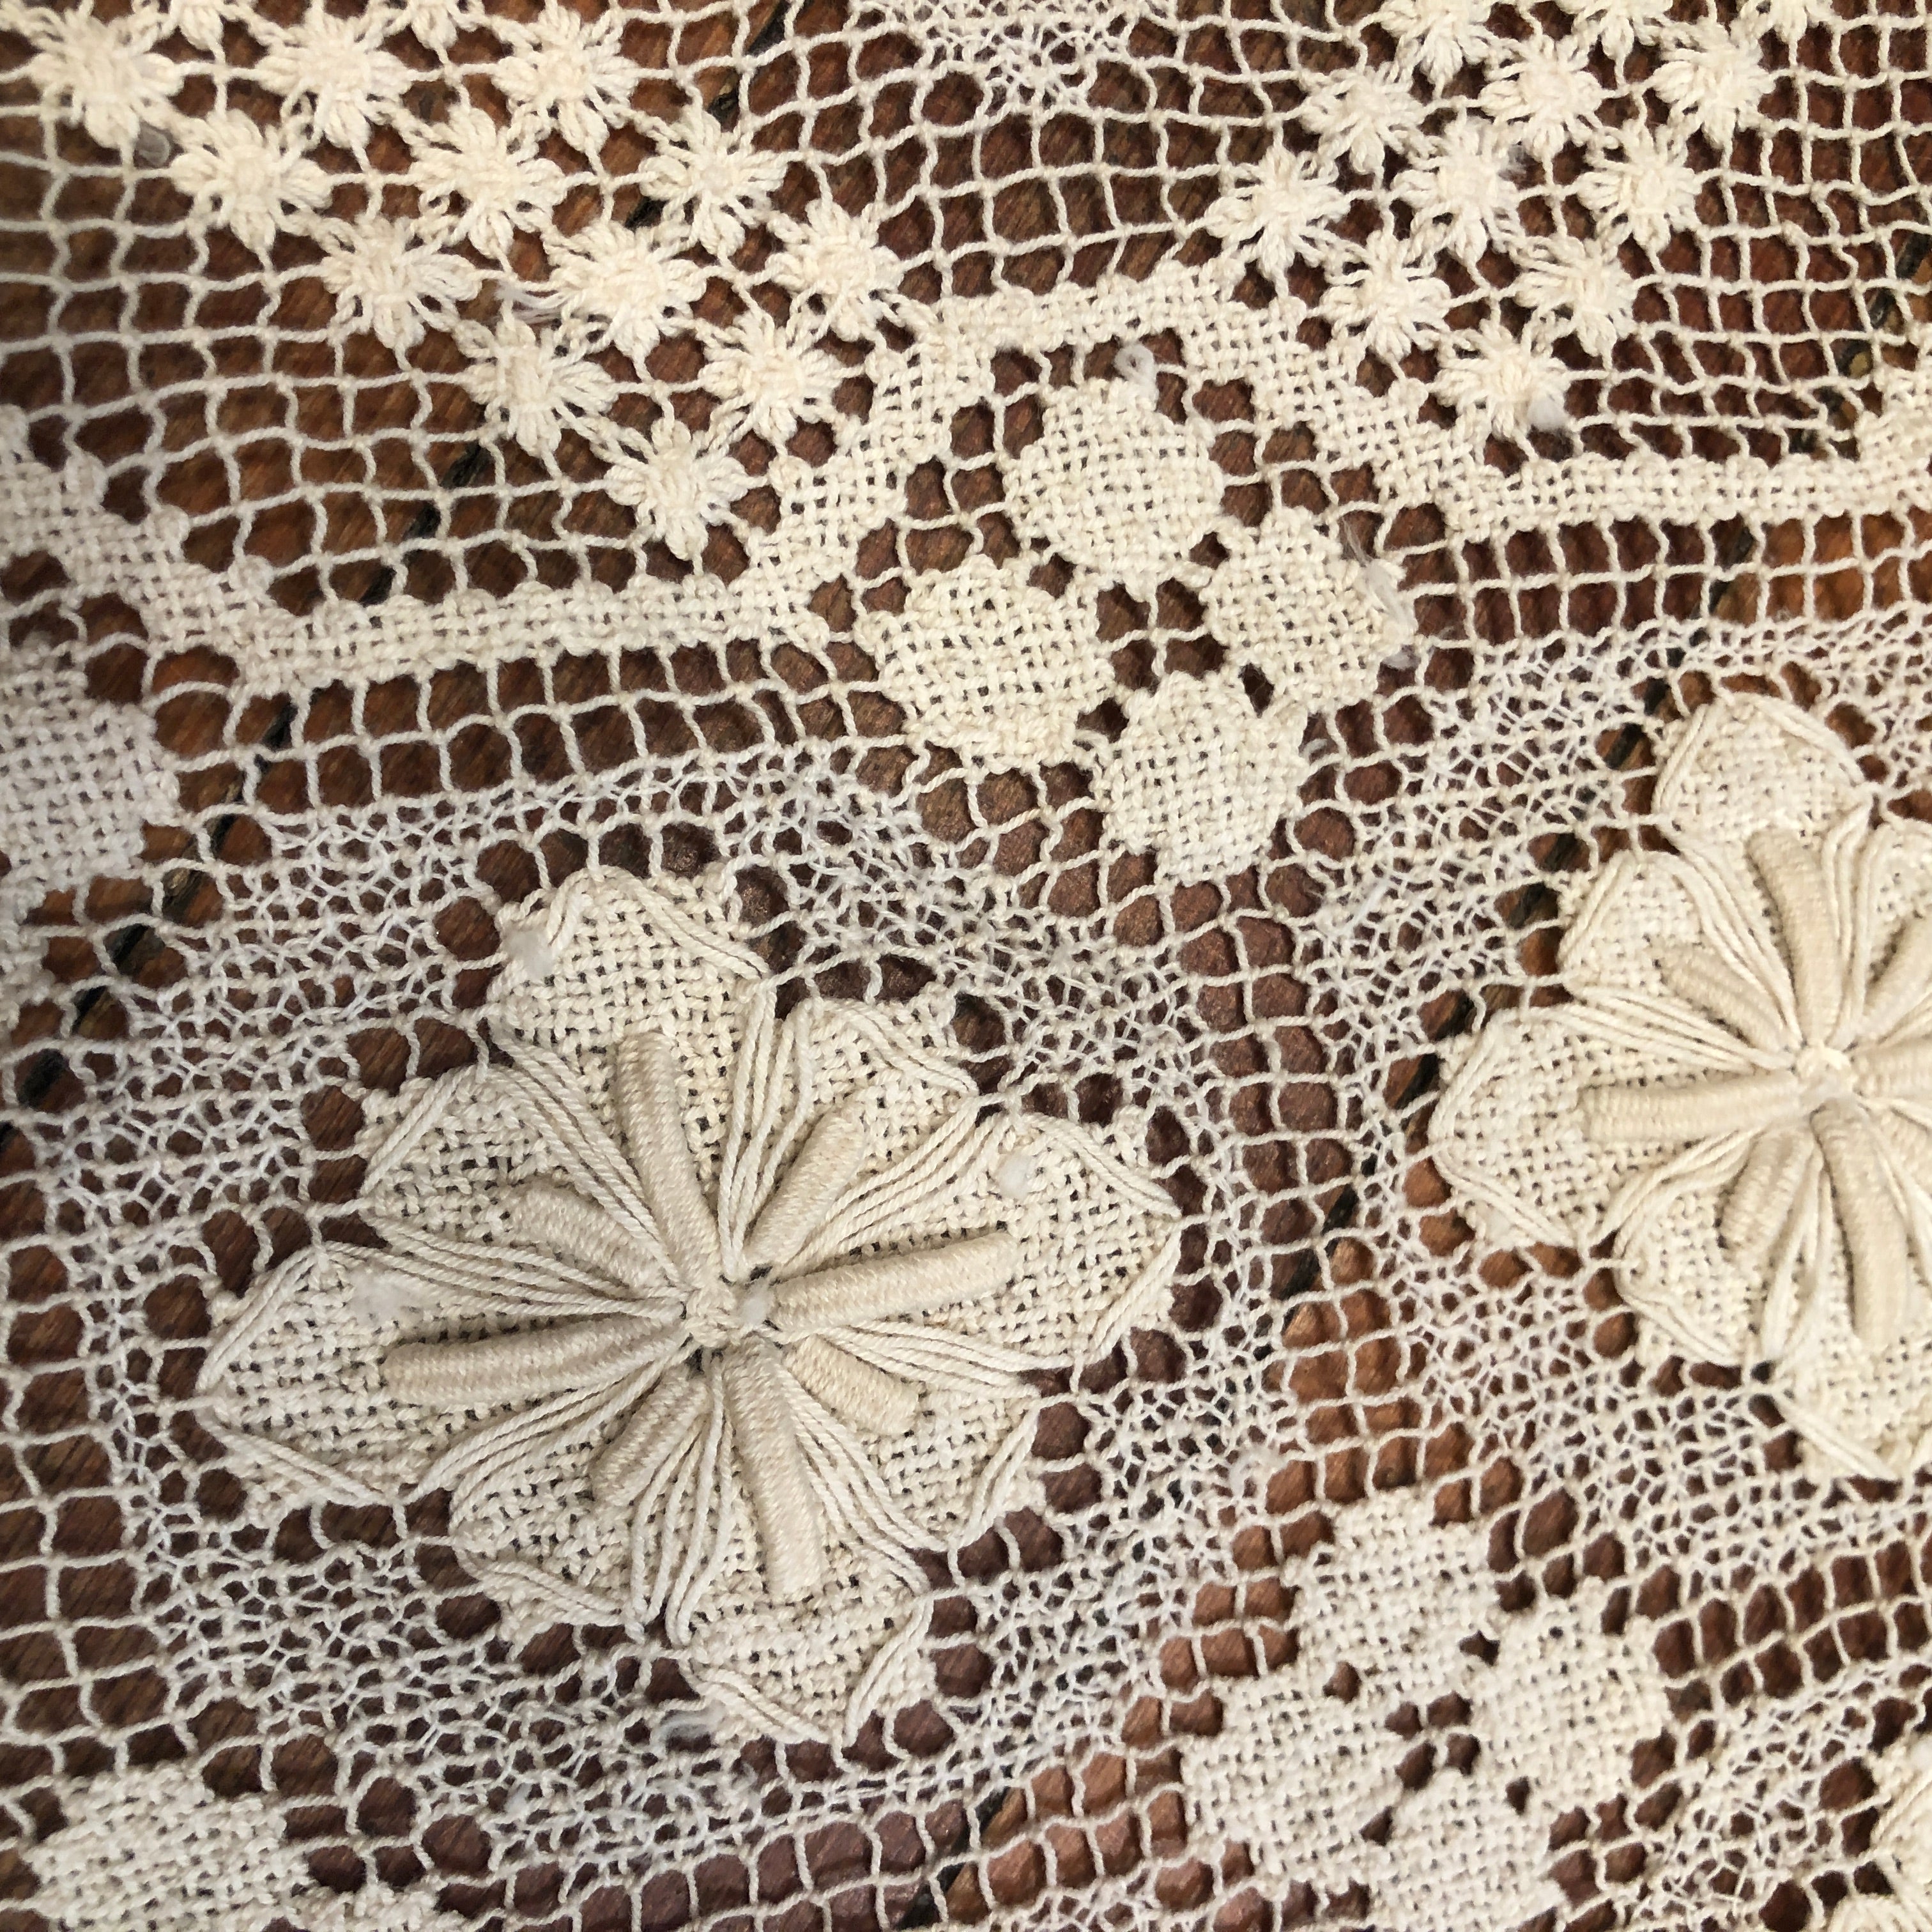 Antique Lacy Cotton Netting Tablecloth